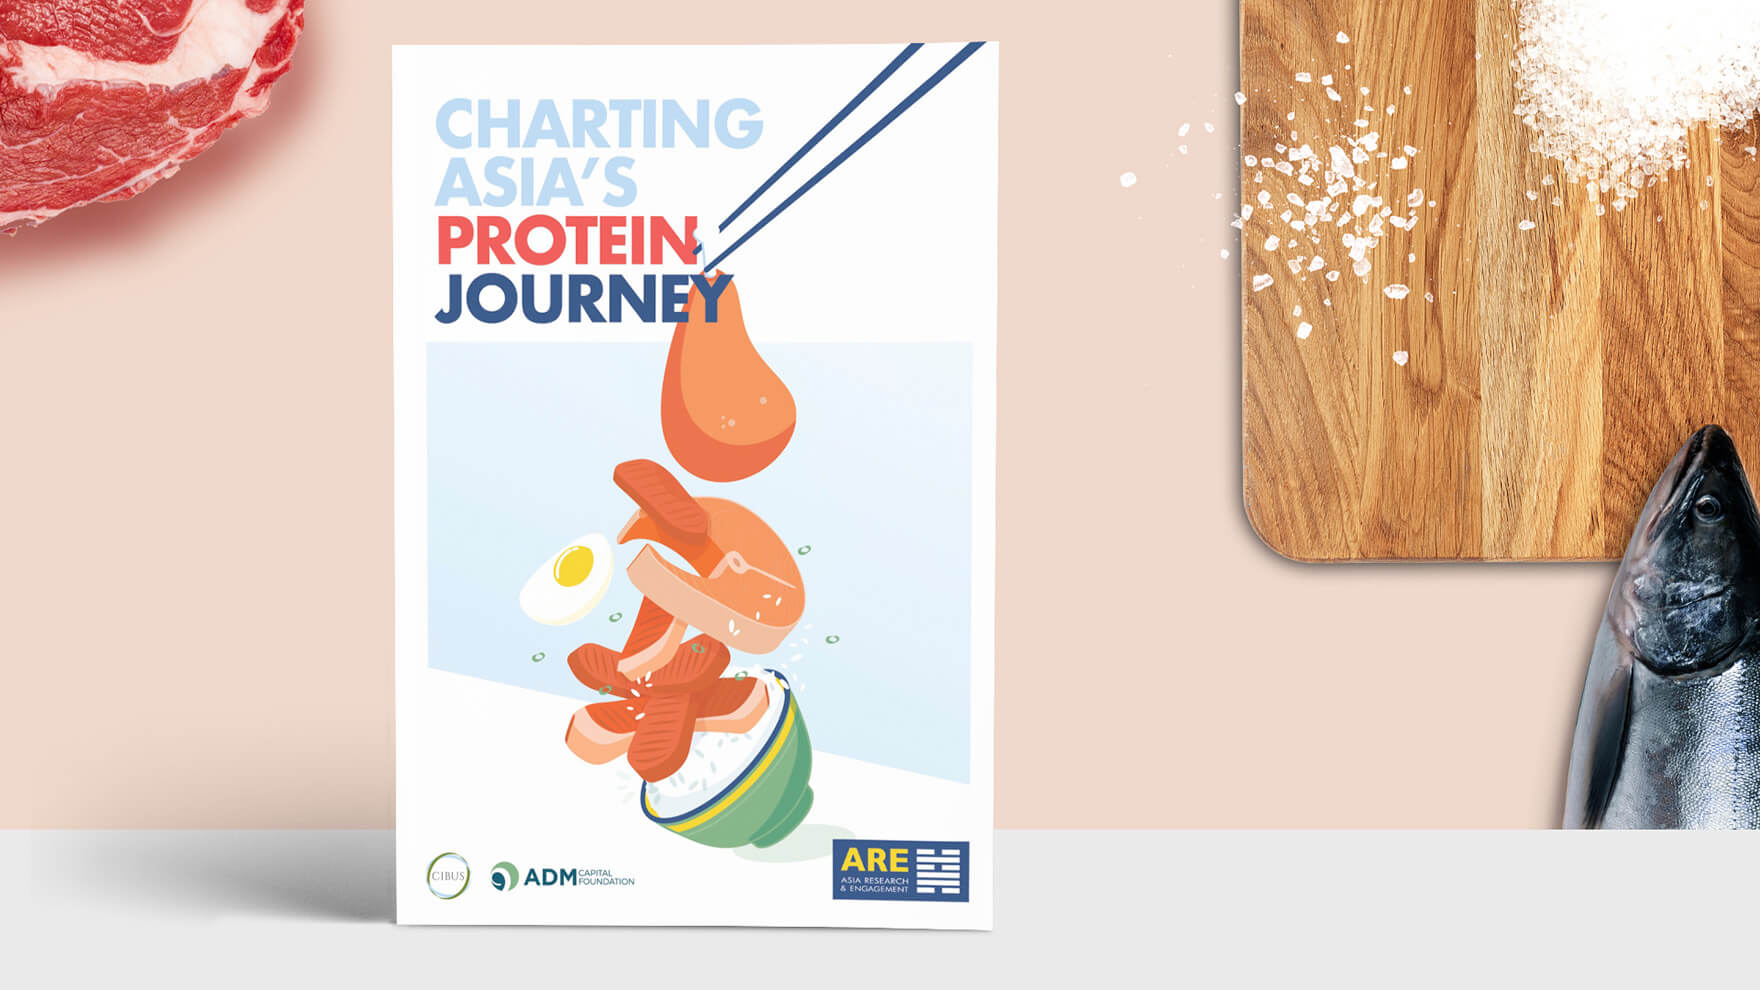 Branding Agency Hong Kong_ADMCF_ChartingAsiasProteinJourney_Research Report Design_CheddarMedia_1_1760